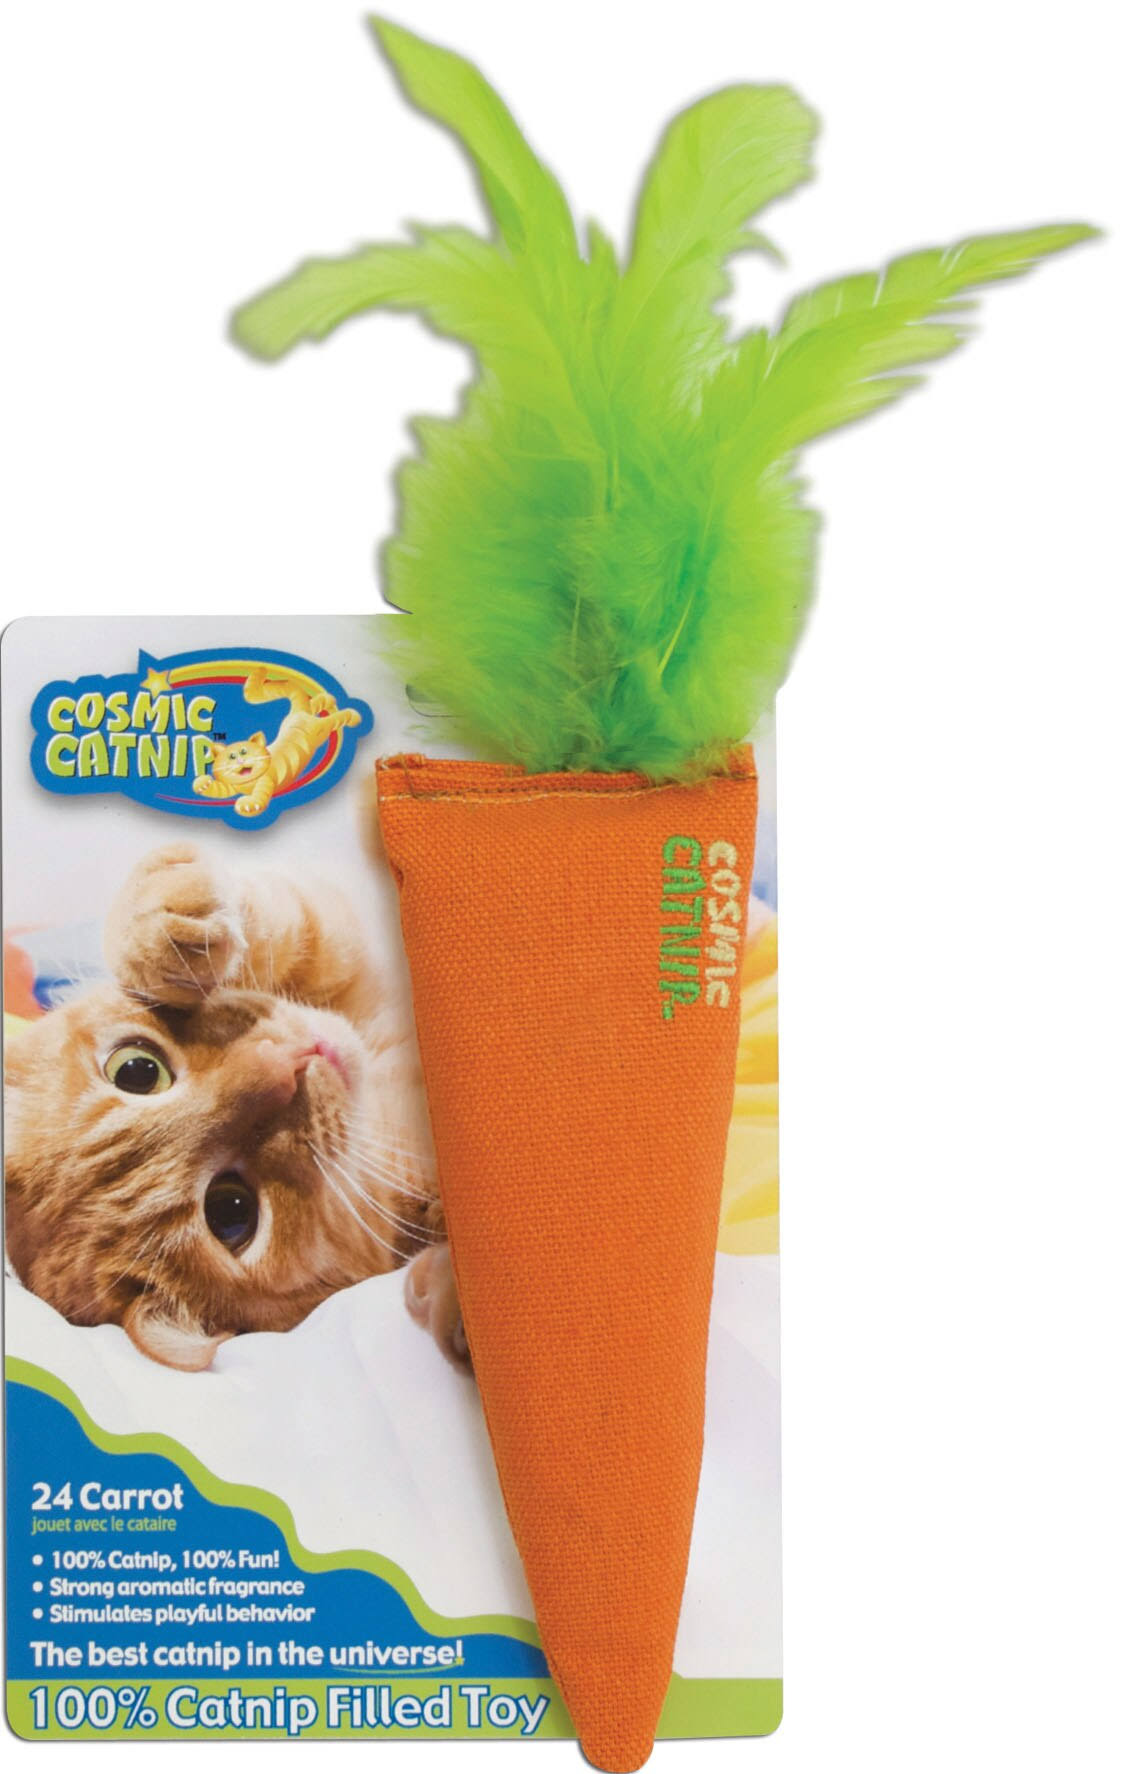 OurPets Cosmic Catnip Filled Carrot Cat Toy - 24 Carrot